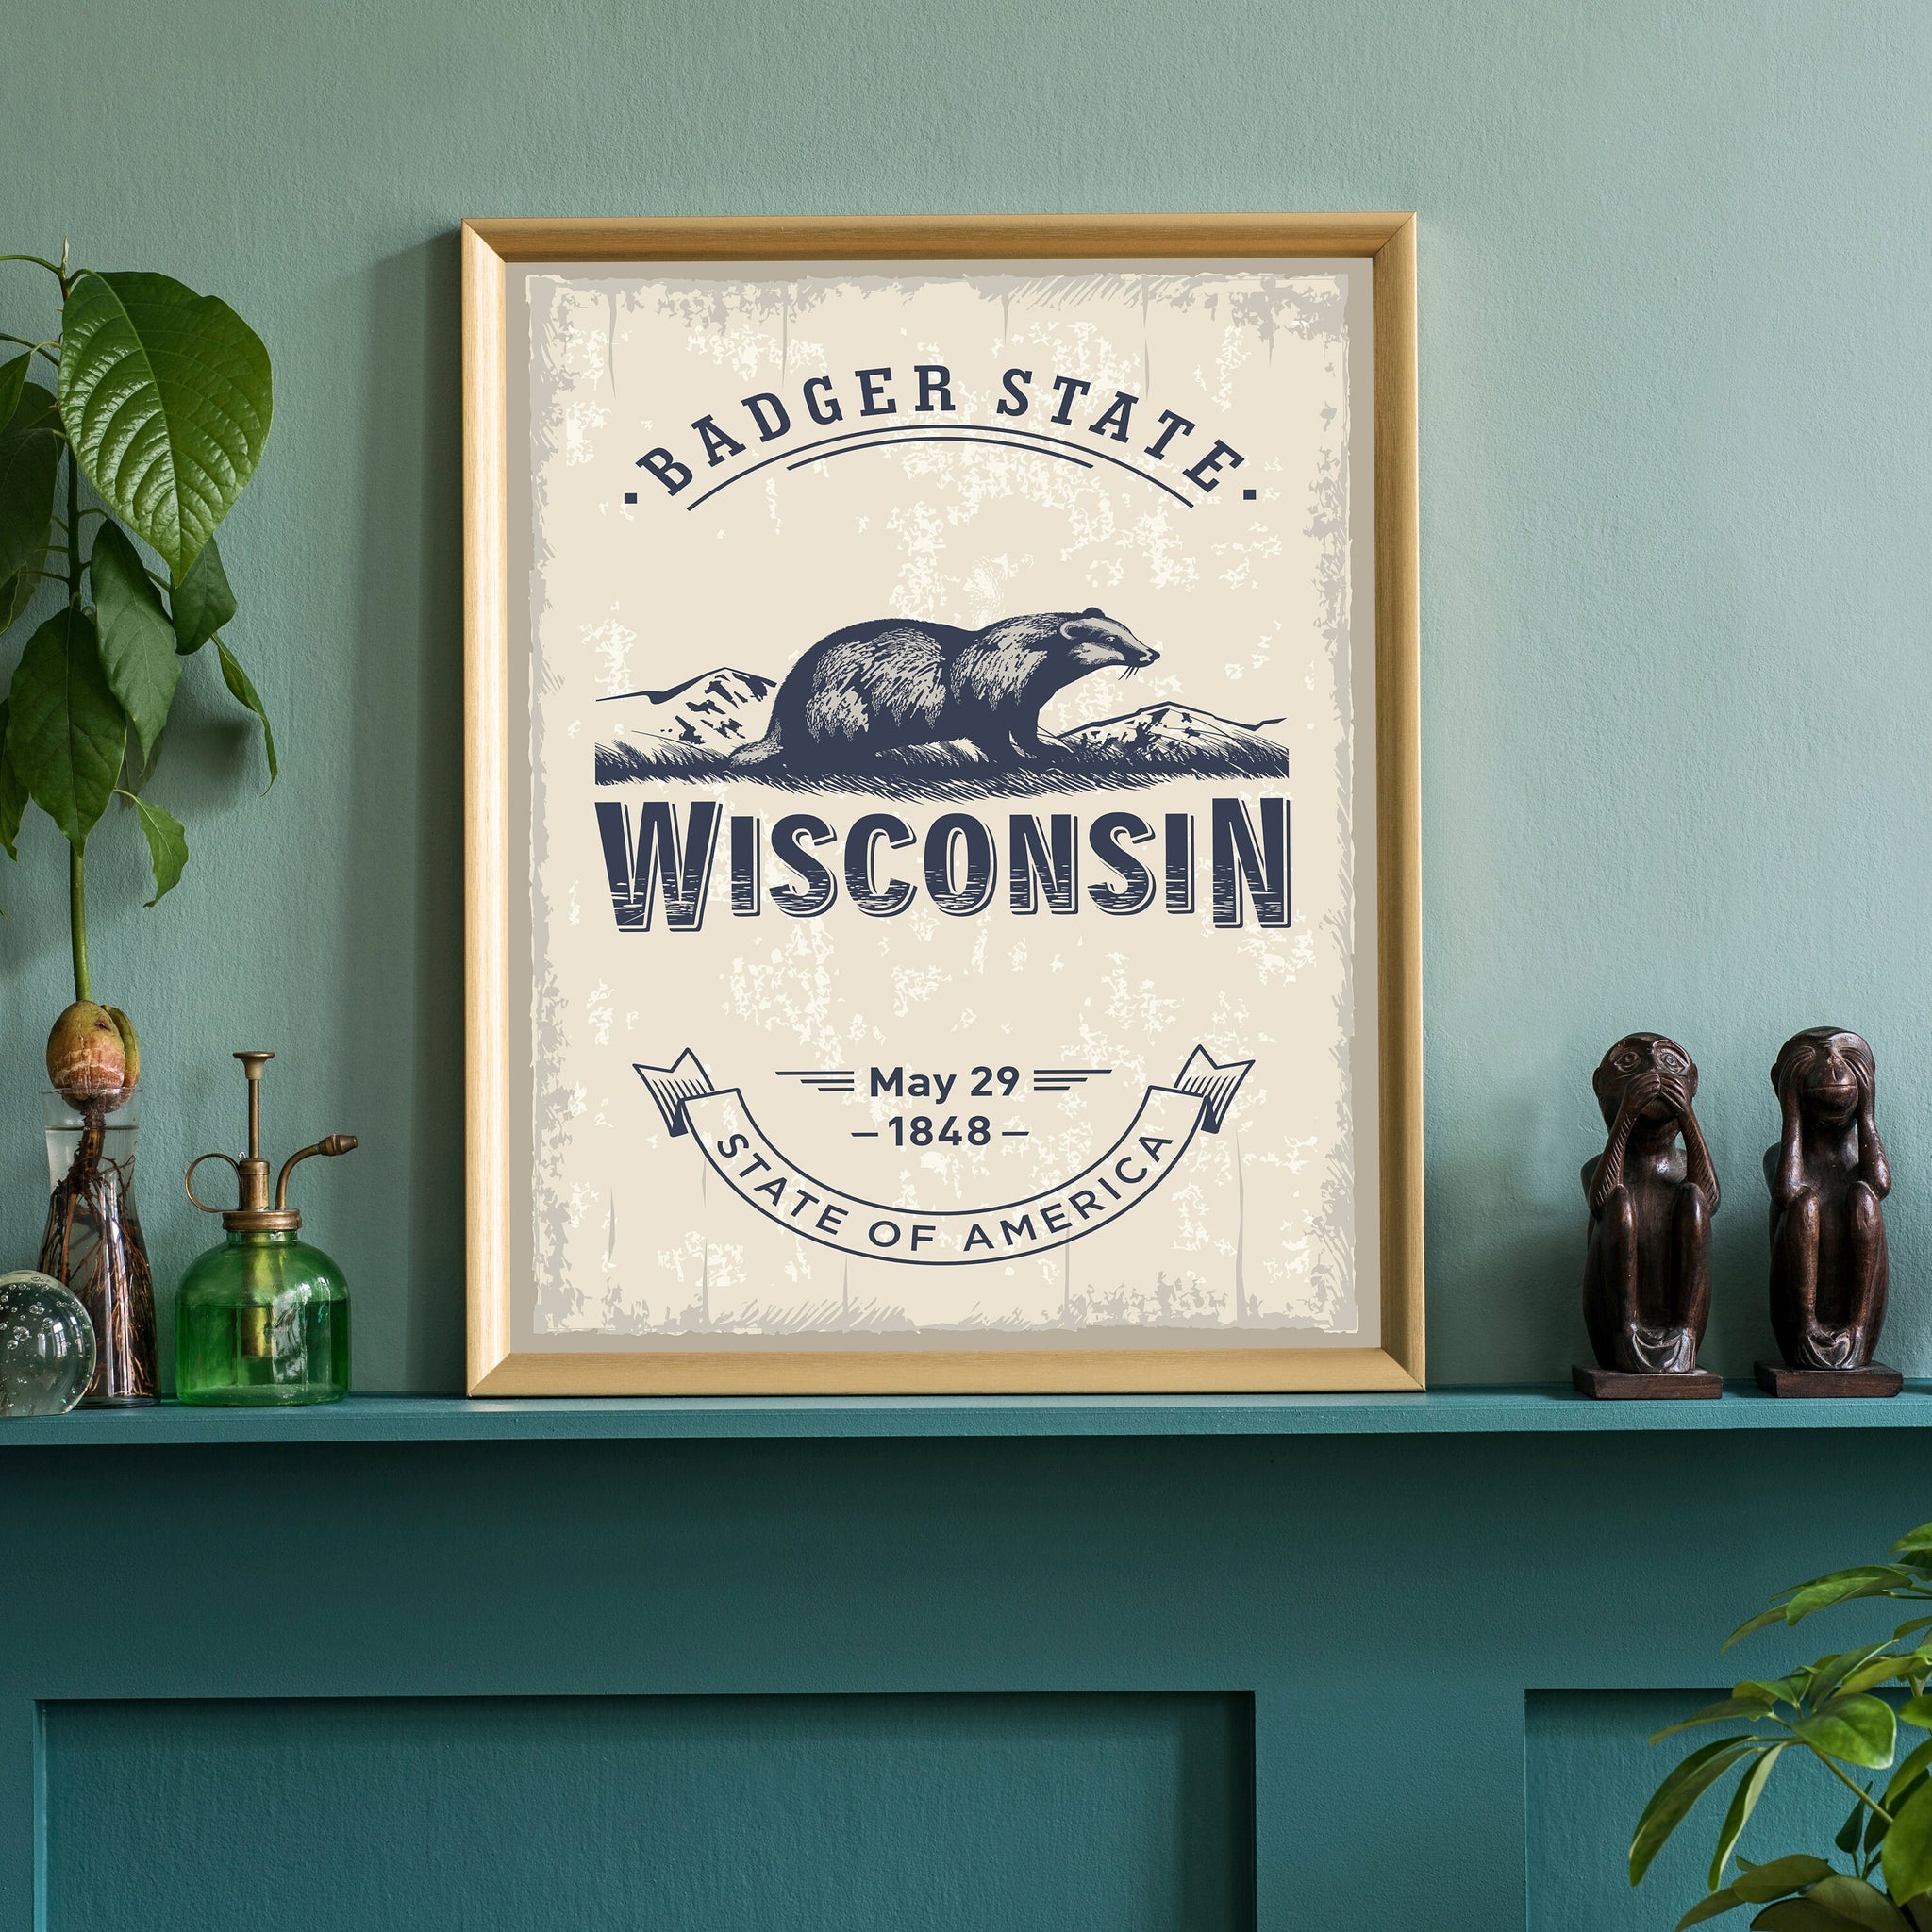 Wisconsin State Symbol Poster, Wisconsin Poster Print, Wisconsin State Emblem Poster, Retro Travel State Poster, Home and Office Wall Art